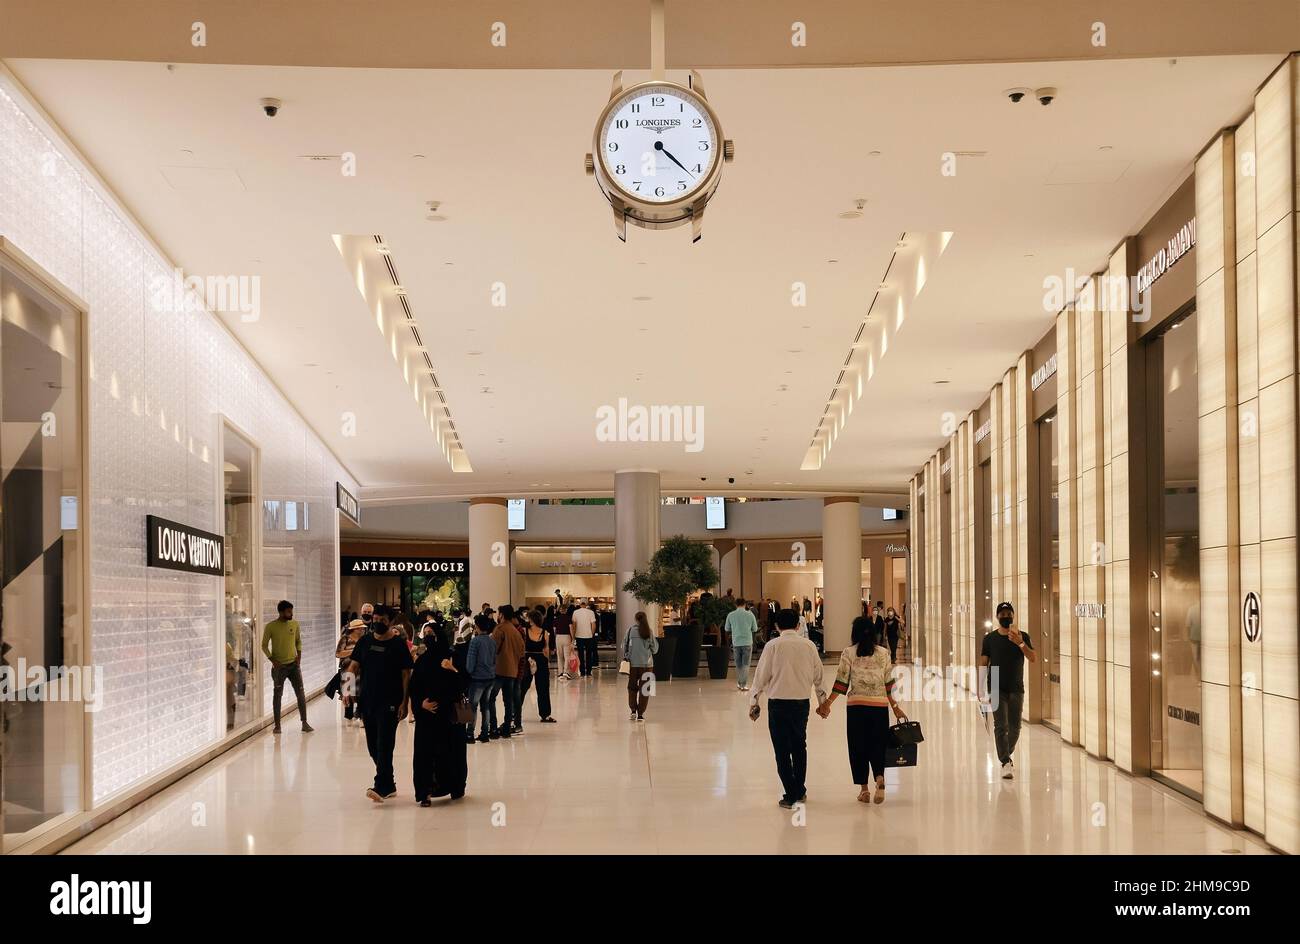 Dubai, United Arab Emirates - January 19, 2022: Interior of Dubai Mall, the biggest mall in town with a lot of fashion shops, restaurants and one big Stock Photo